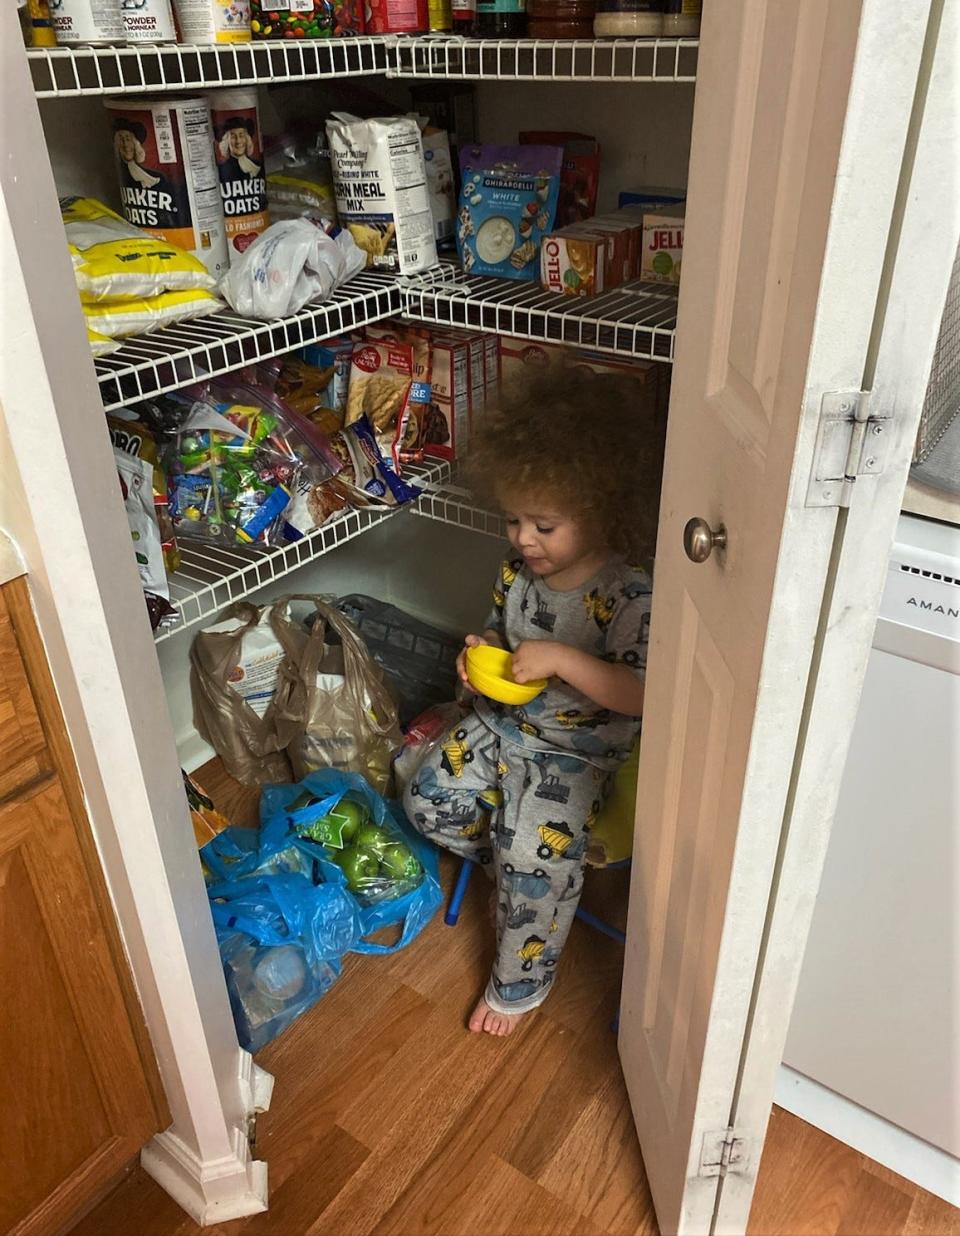 Jeffery Anderson sneaks a snack in the family's pantry.